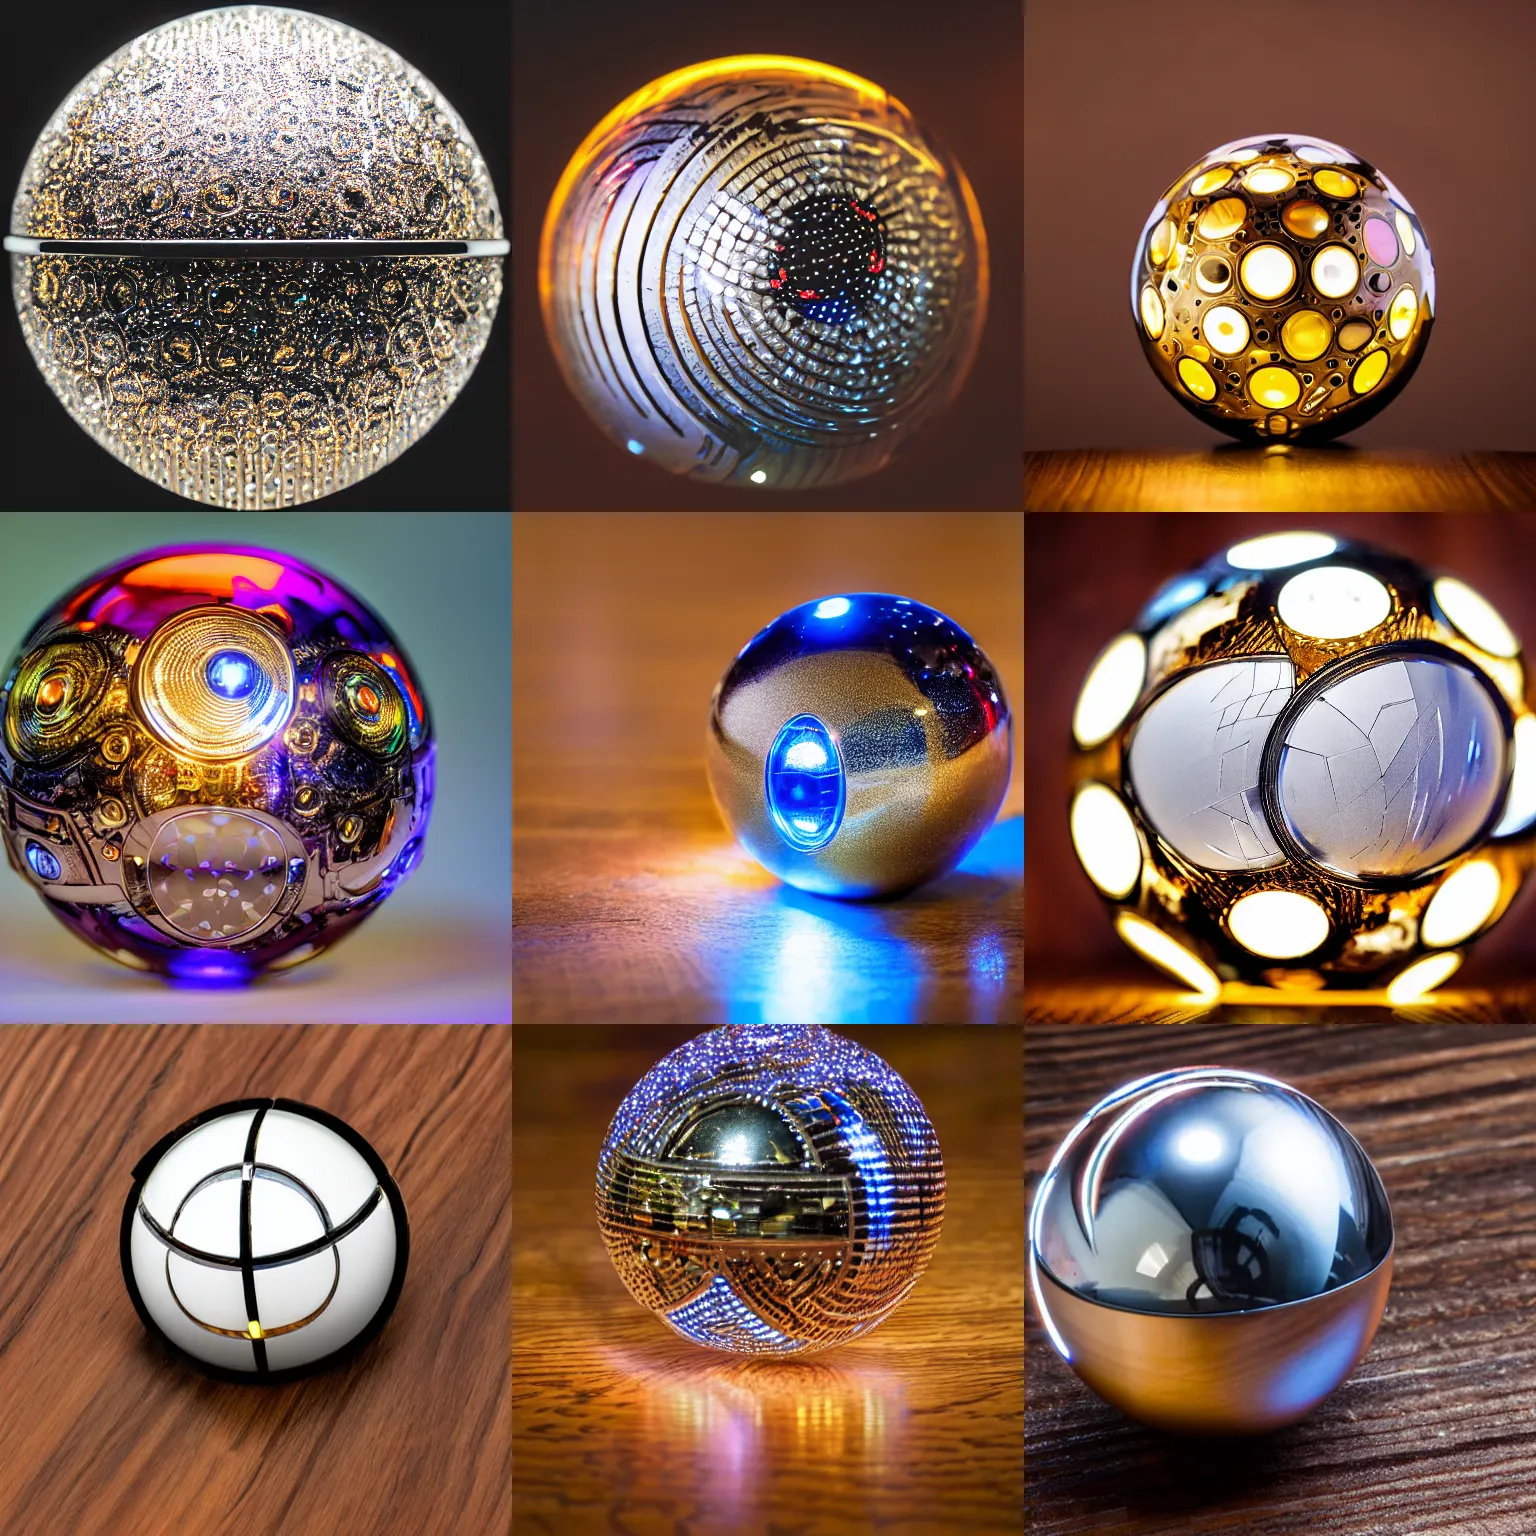 Prompt: a studio photograph of a futuristic high - tech intricate jeweled chrome pokeball with leds and golden inlays laying on wood grain, xf iq 4, 1 5 0 mp, 5 0 mm, f 1. 4, iso 2 0 0, 1 / 1 6 0 s, natural light, adobe lightroom, photolab, affinity photo, photodirector 3 6 5